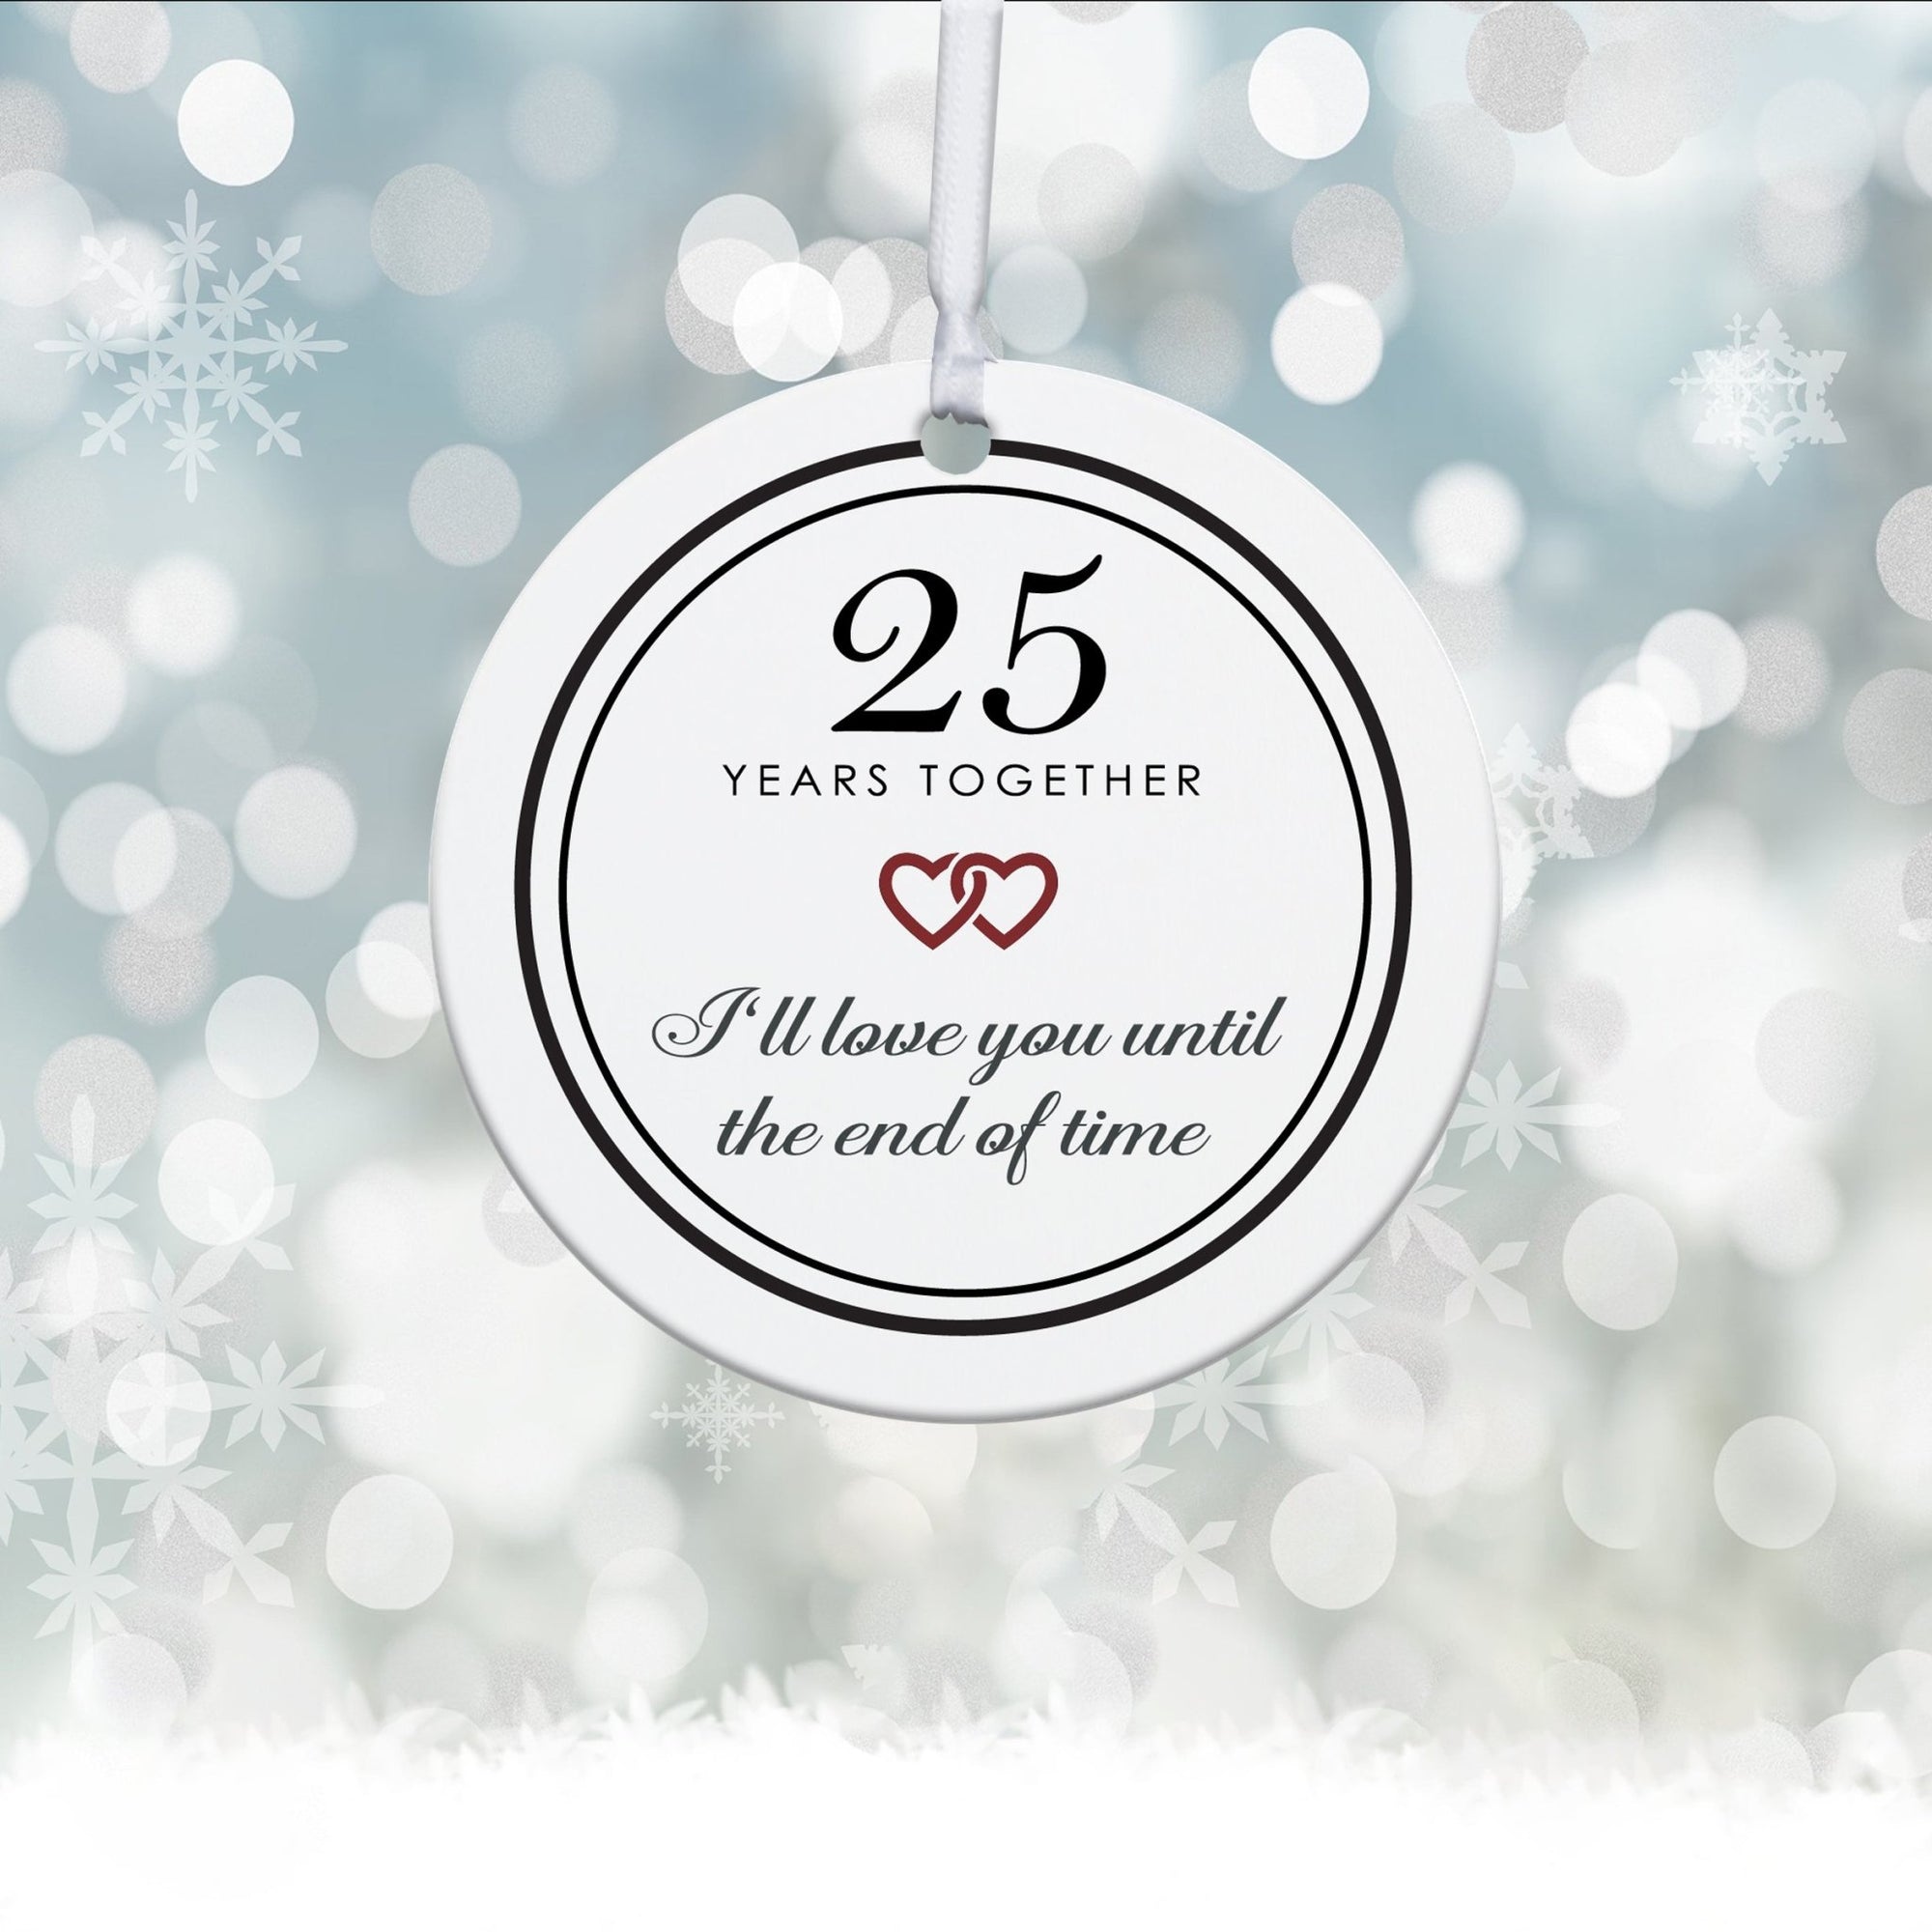 25th Year Together Wedding Anniversary White Ornament With Inspirational Message Gift Ideas - I Love You Till The End Of Time V2 - LifeSong Milestones